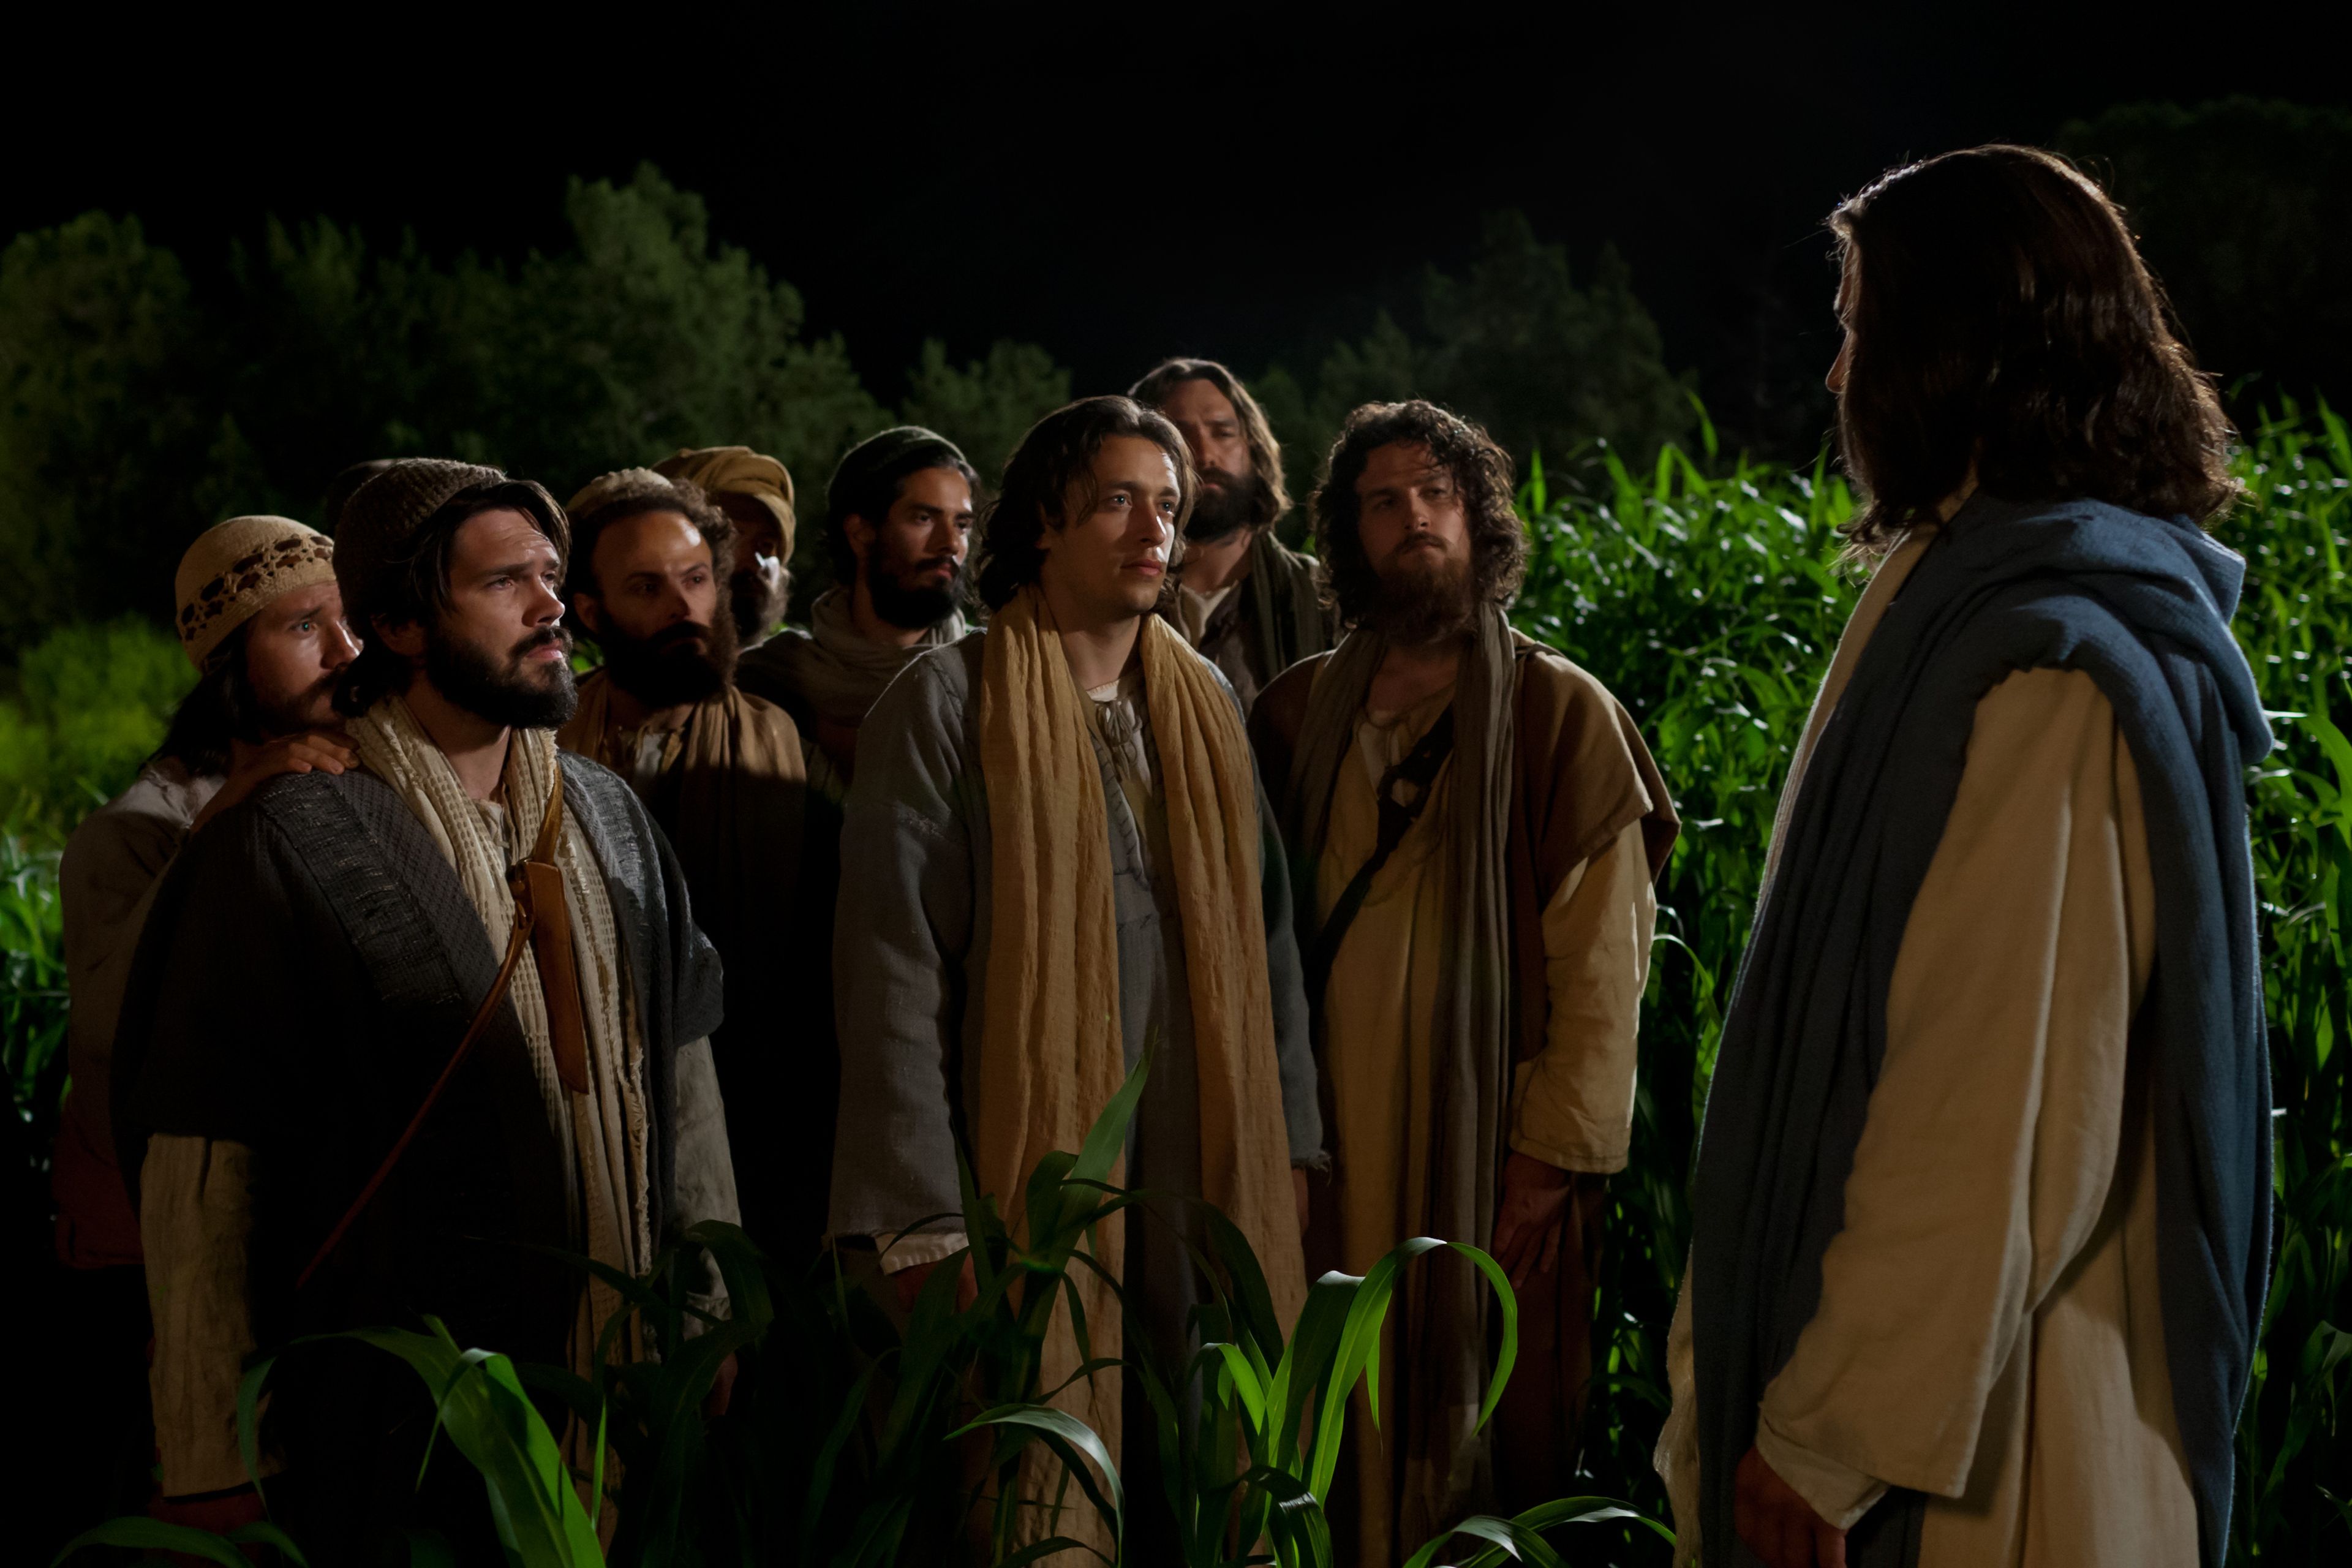 Jesus talking to the eleven disciples at night.